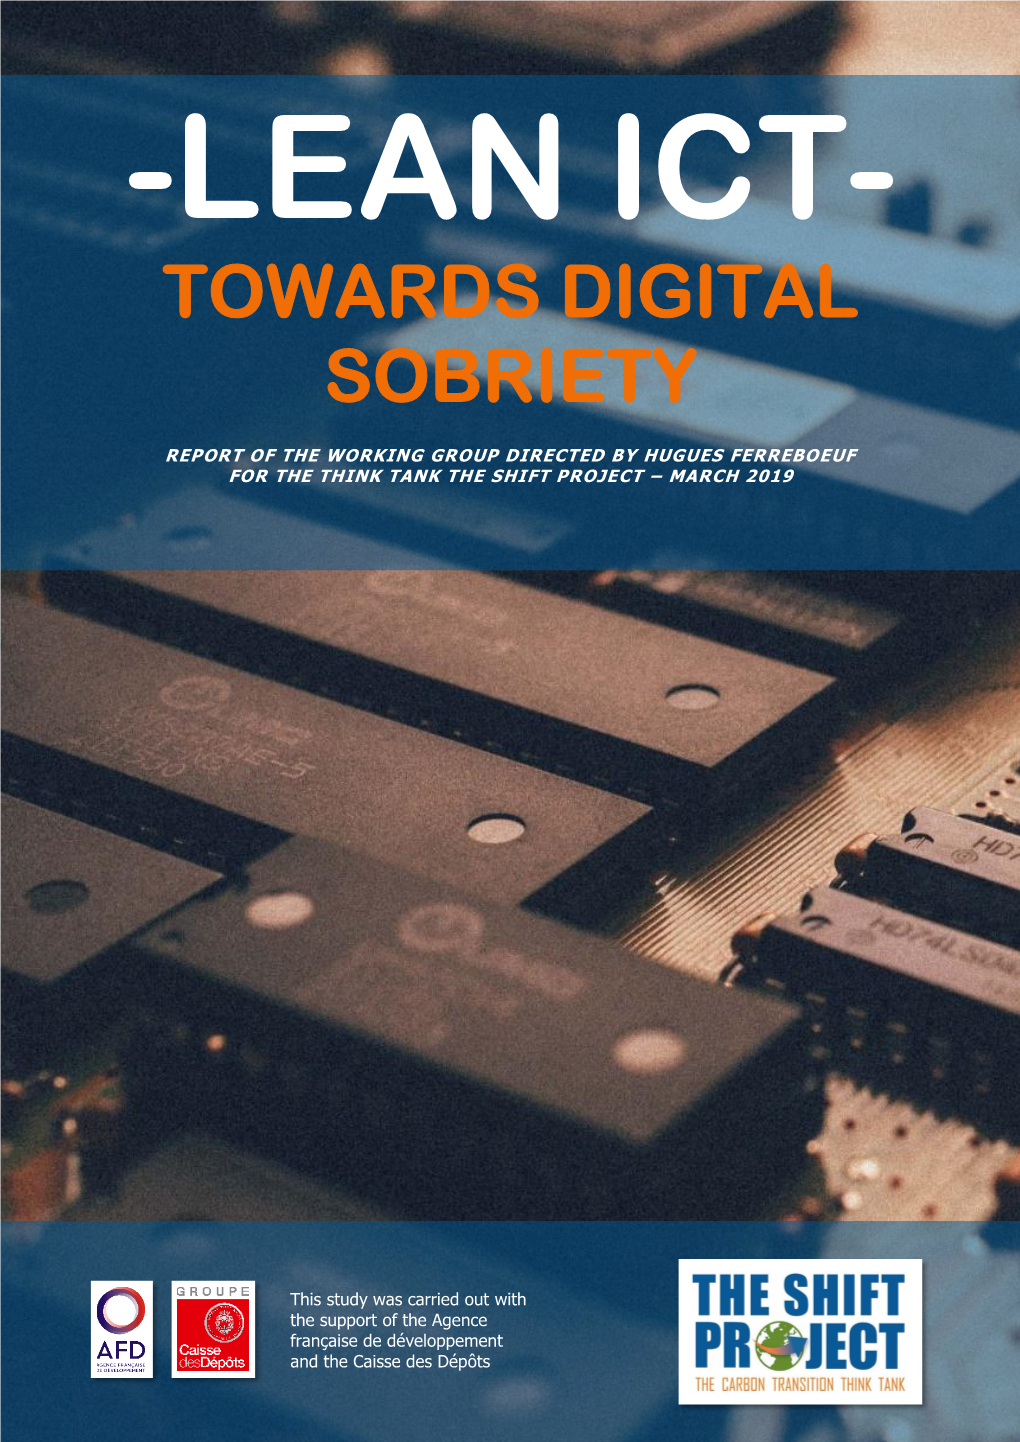 Report / Lean Ict: Towards Digital Sobriety 2